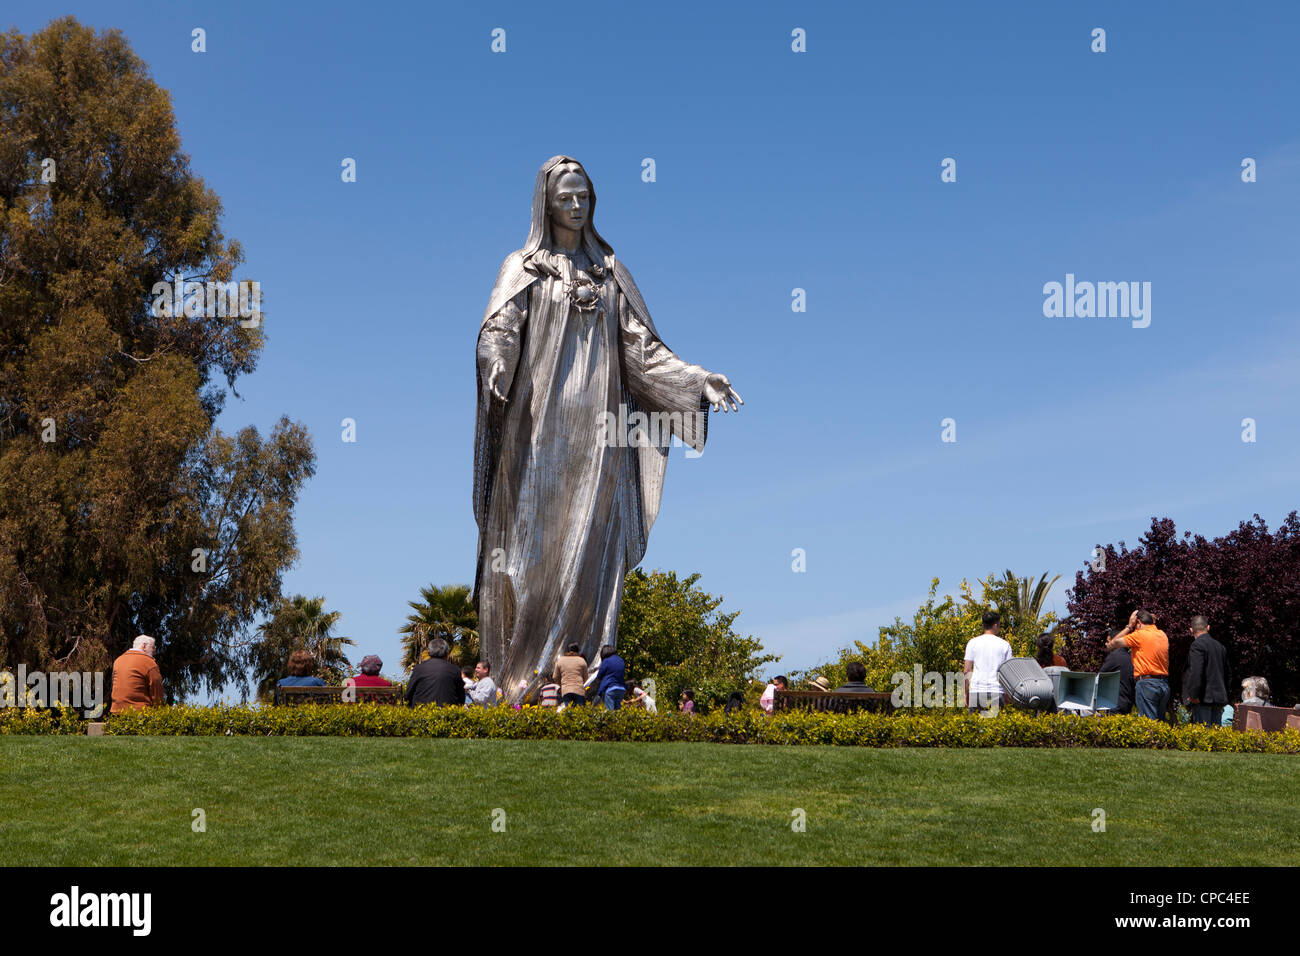 Stainless steel statue of the Virgin Mary Stock Photo